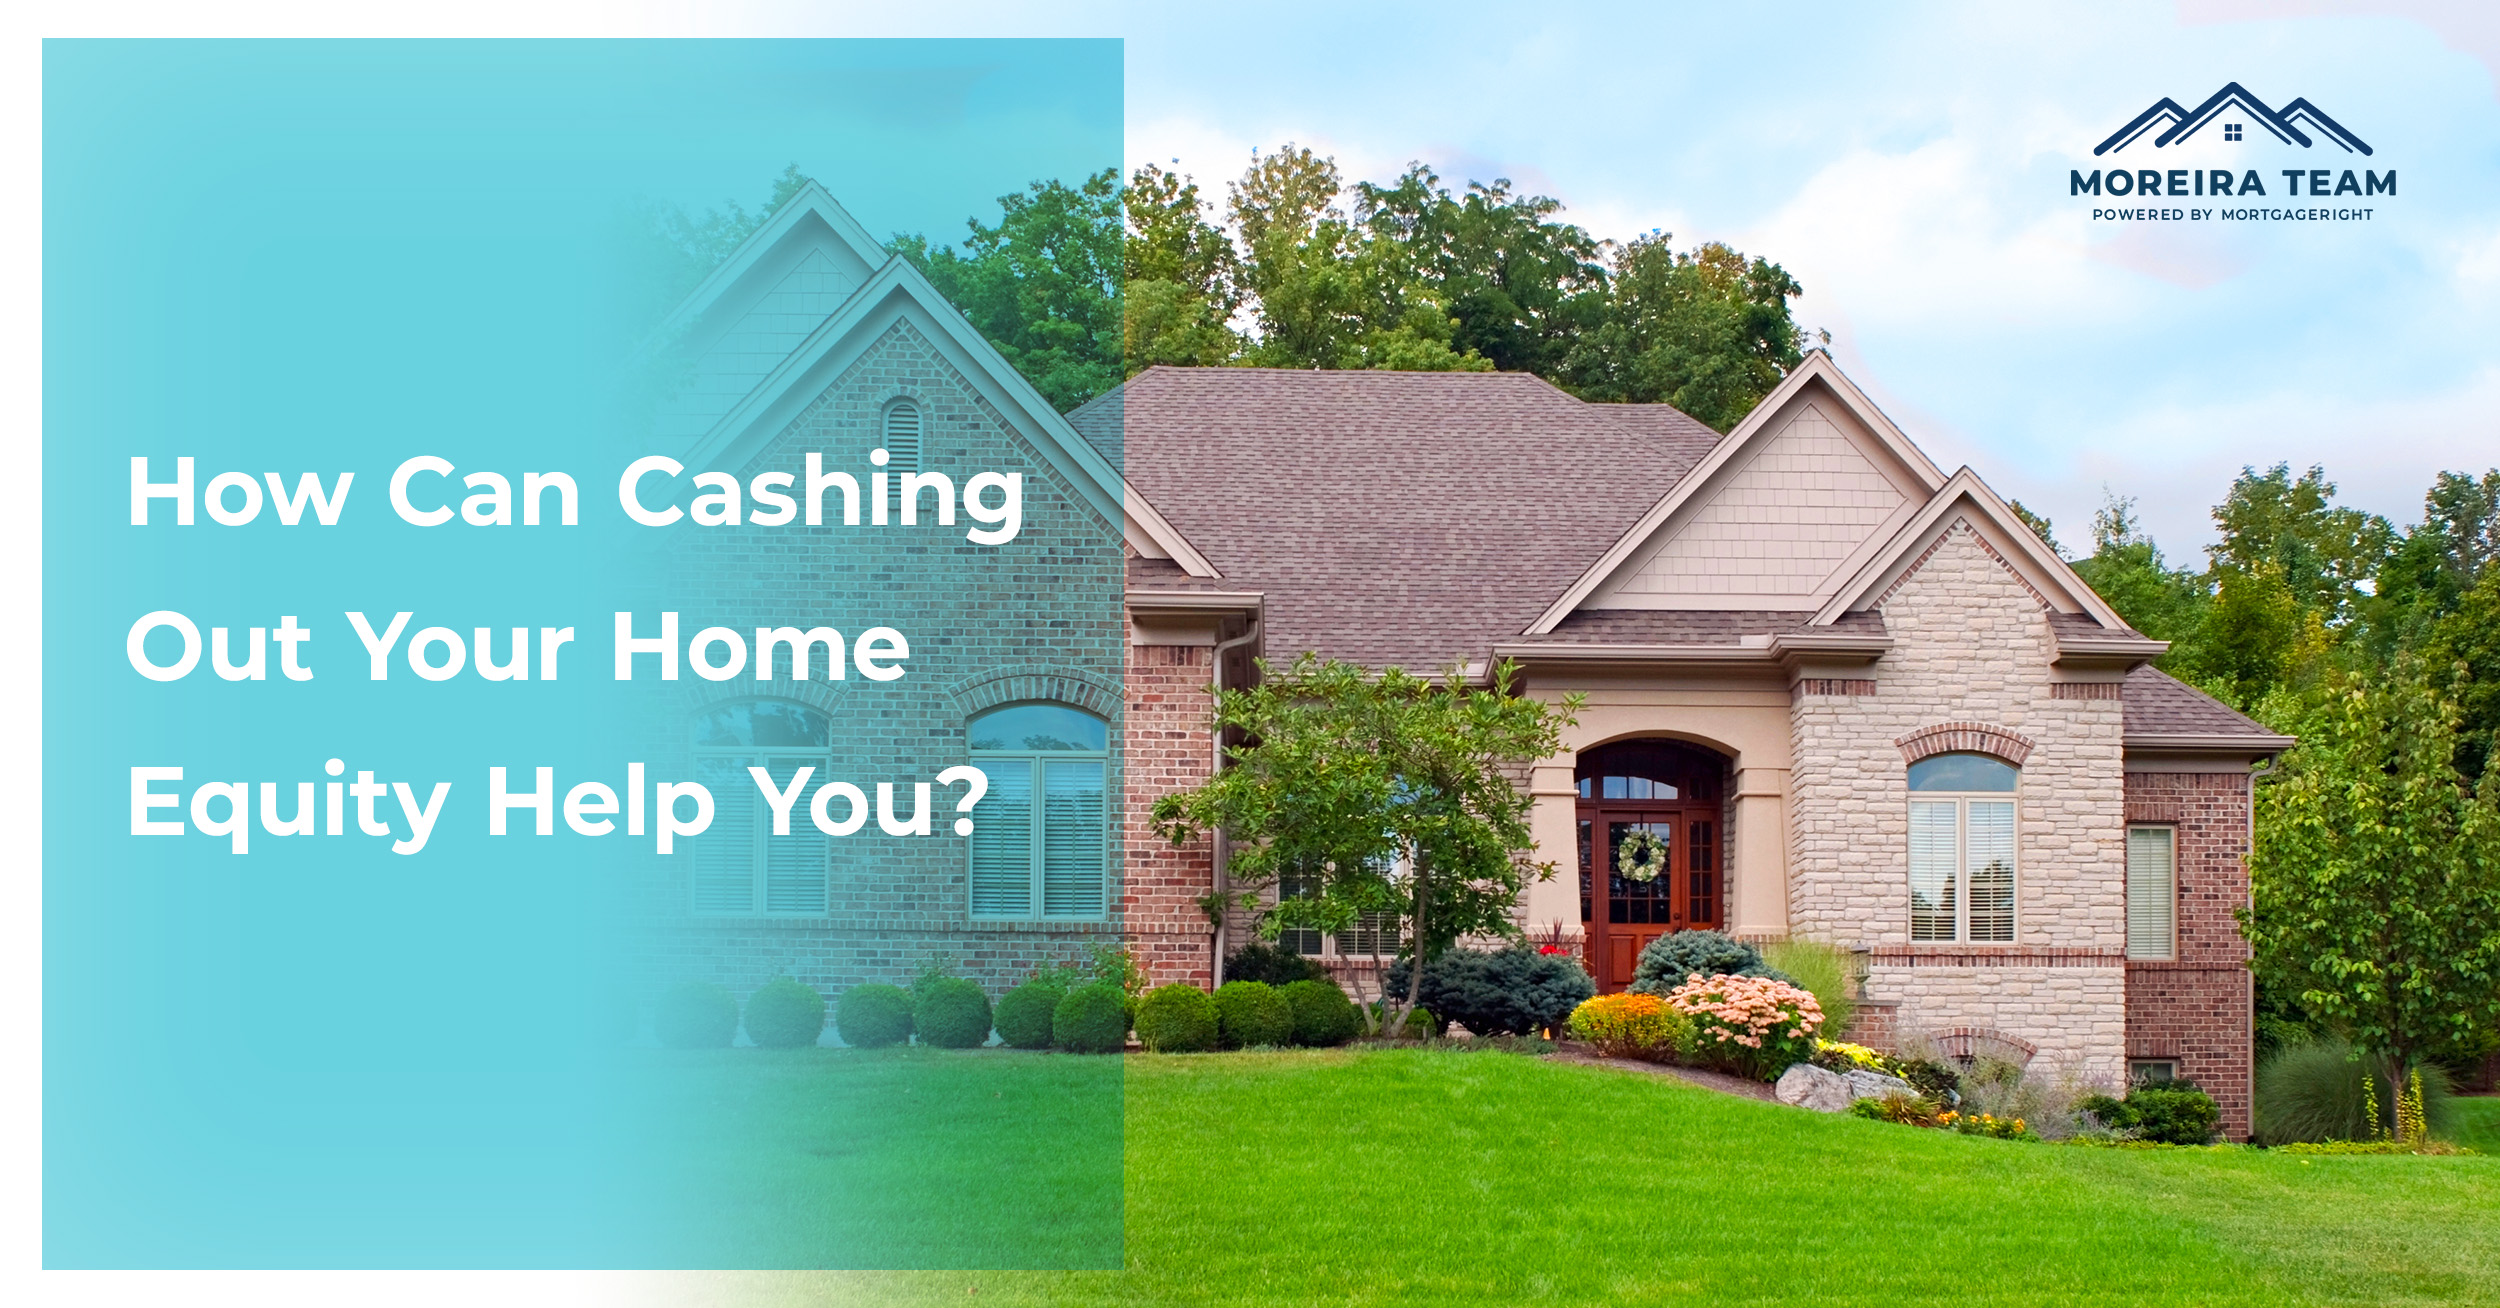 How Can Cashing Out Your Home Equity Help You?